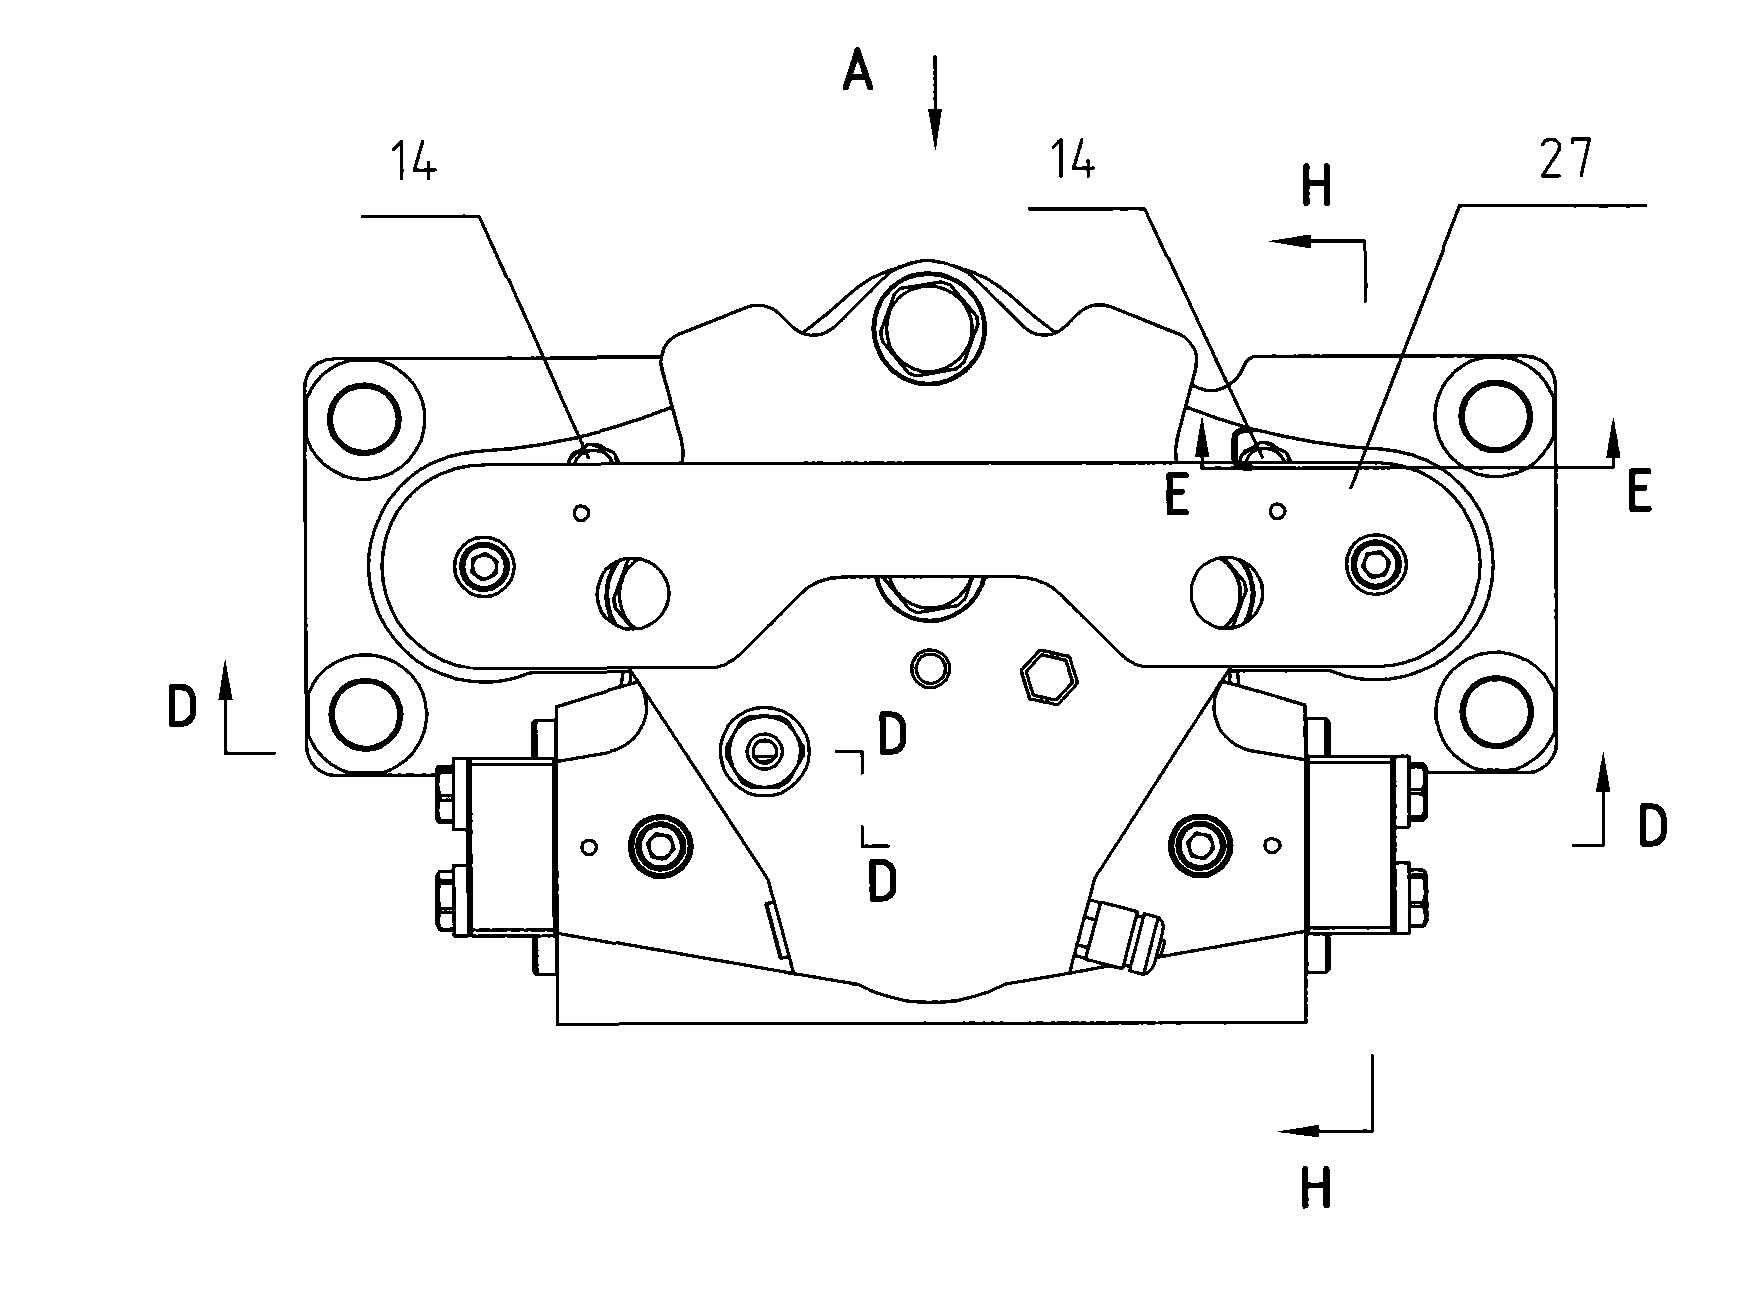 Brake caliper assembly of normally open type wind driven generator main shaft system